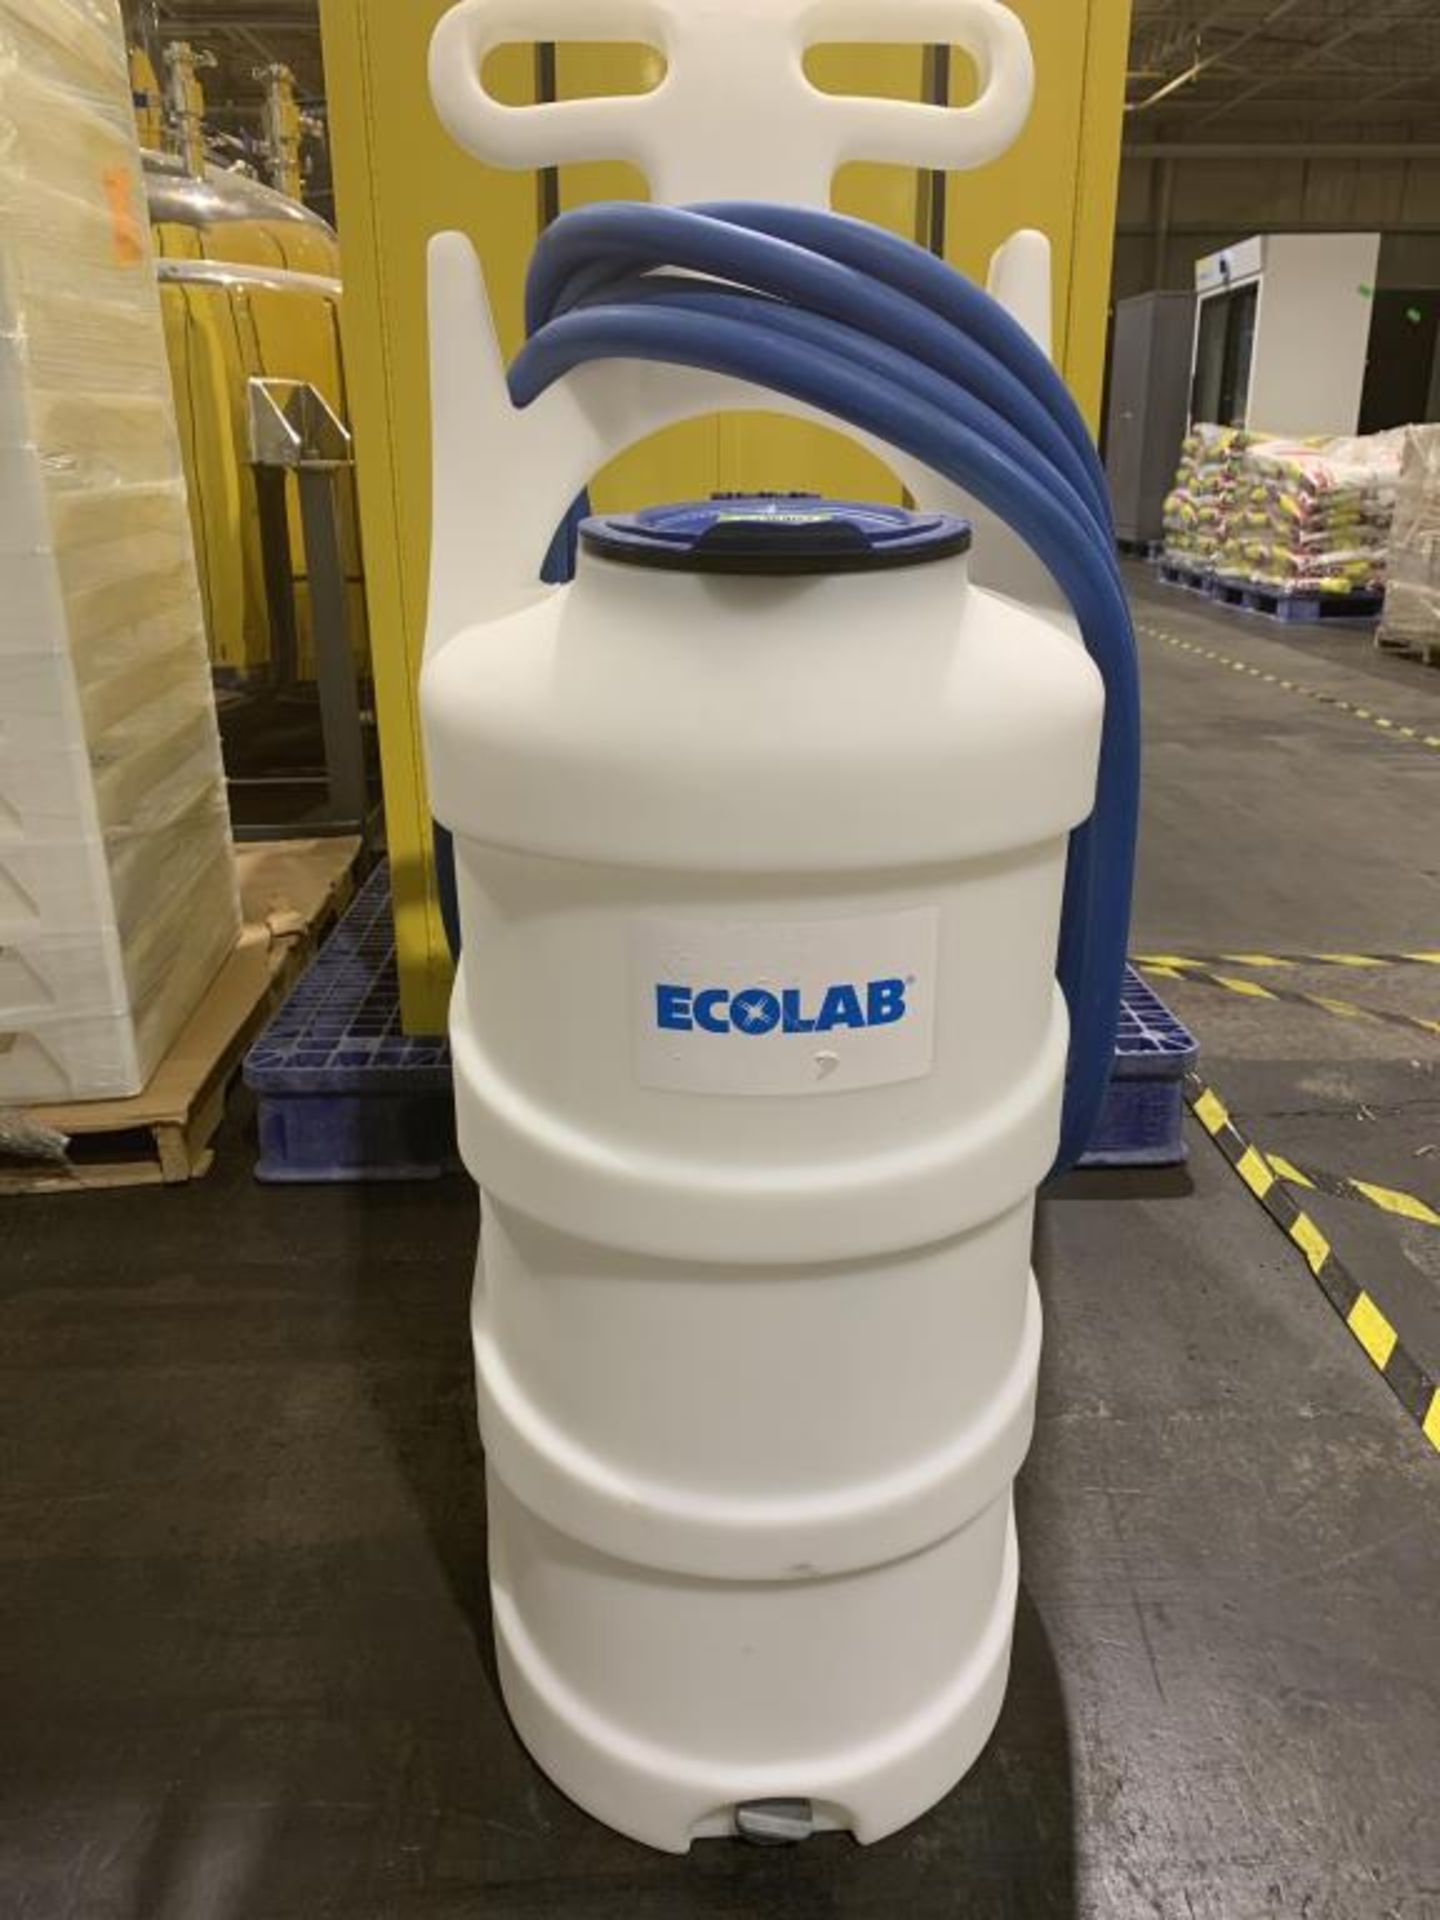 Ecolab 20 Gal Portable Foaming Unit - Image 2 of 12